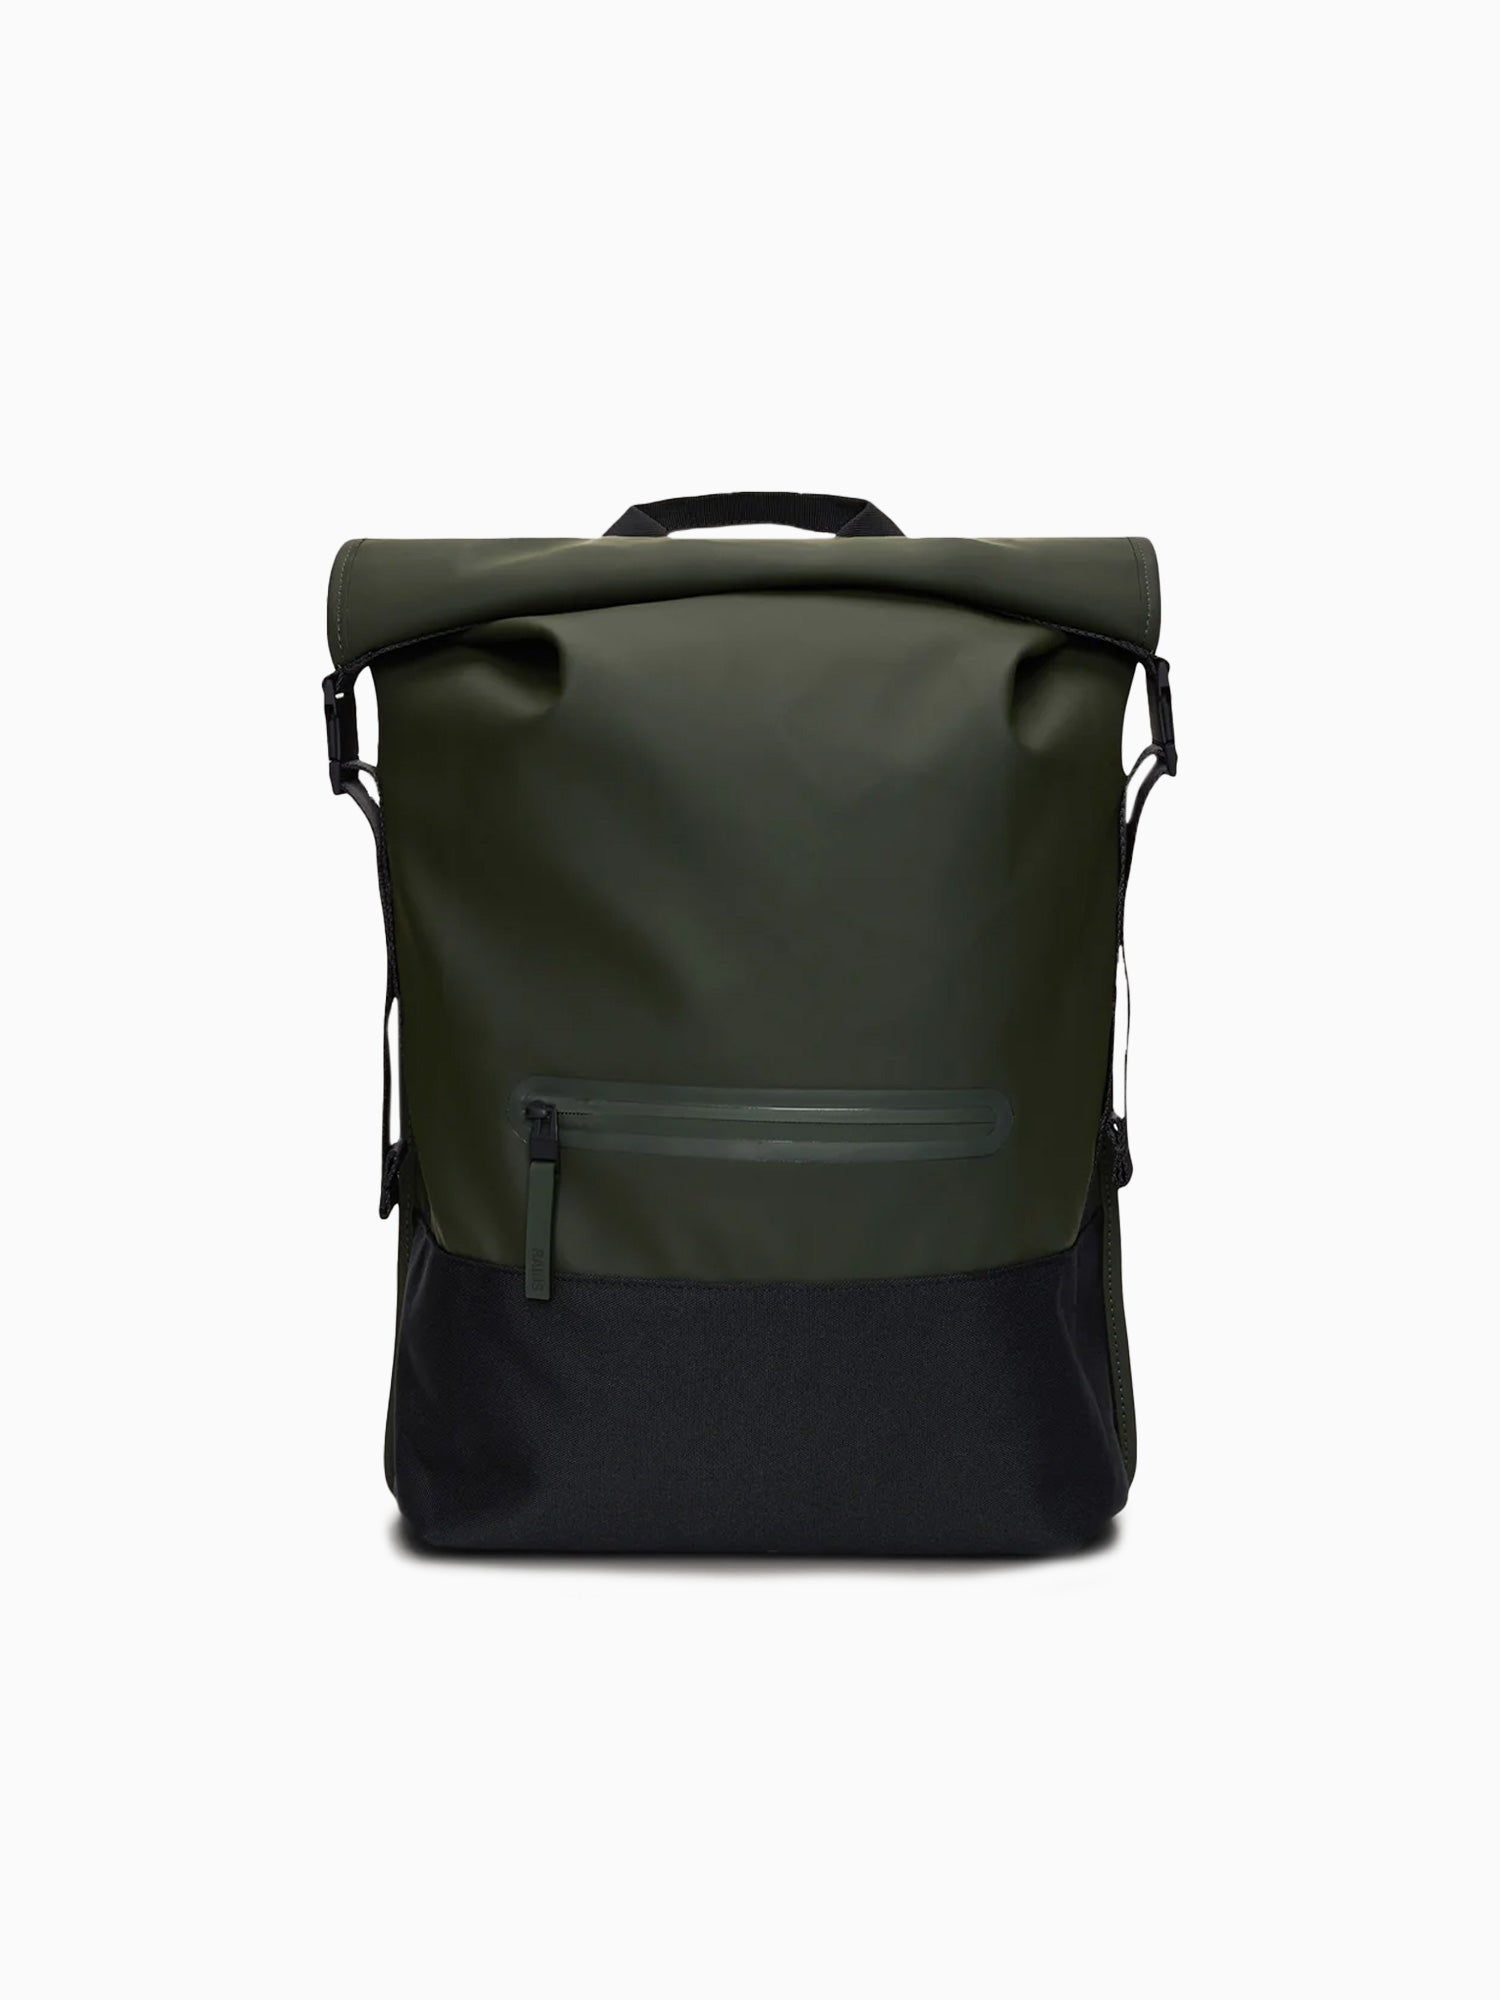 Trail Rolltop Backpack W3, 03 Green